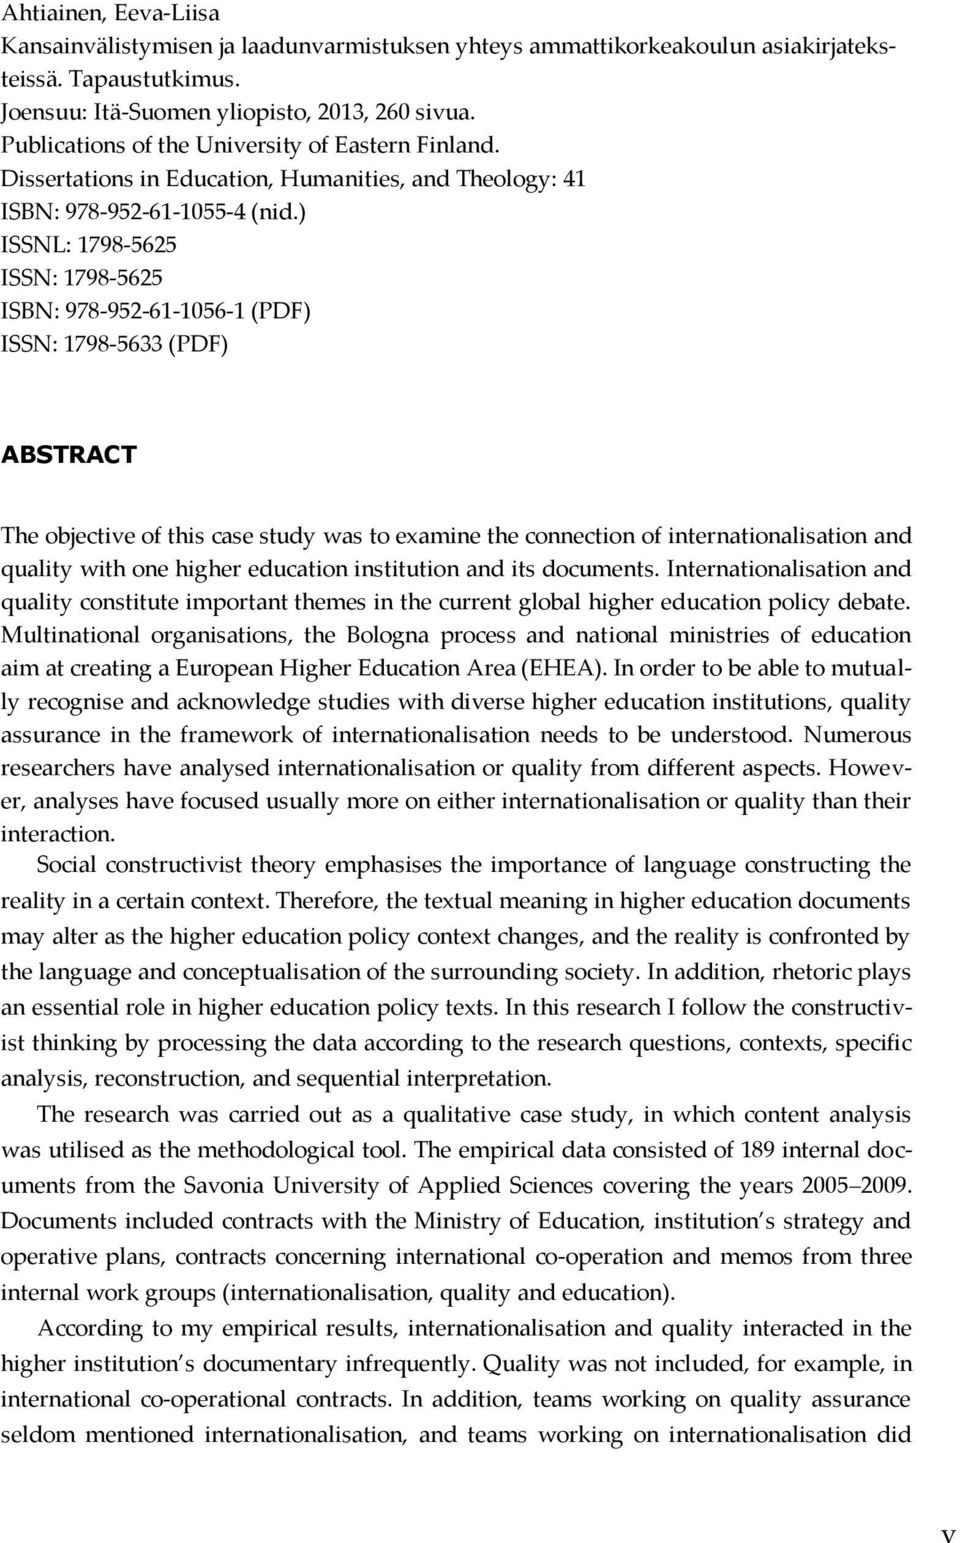 ) ISSNL: 1798-5625 ISSN: 1798-5625 ISBN: 978-952-61-1056-1 (PDF) ISSN: 1798-5633 (PDF) ABSTRACT The objective of this case study was to examine the connection of internationalisation and quality with